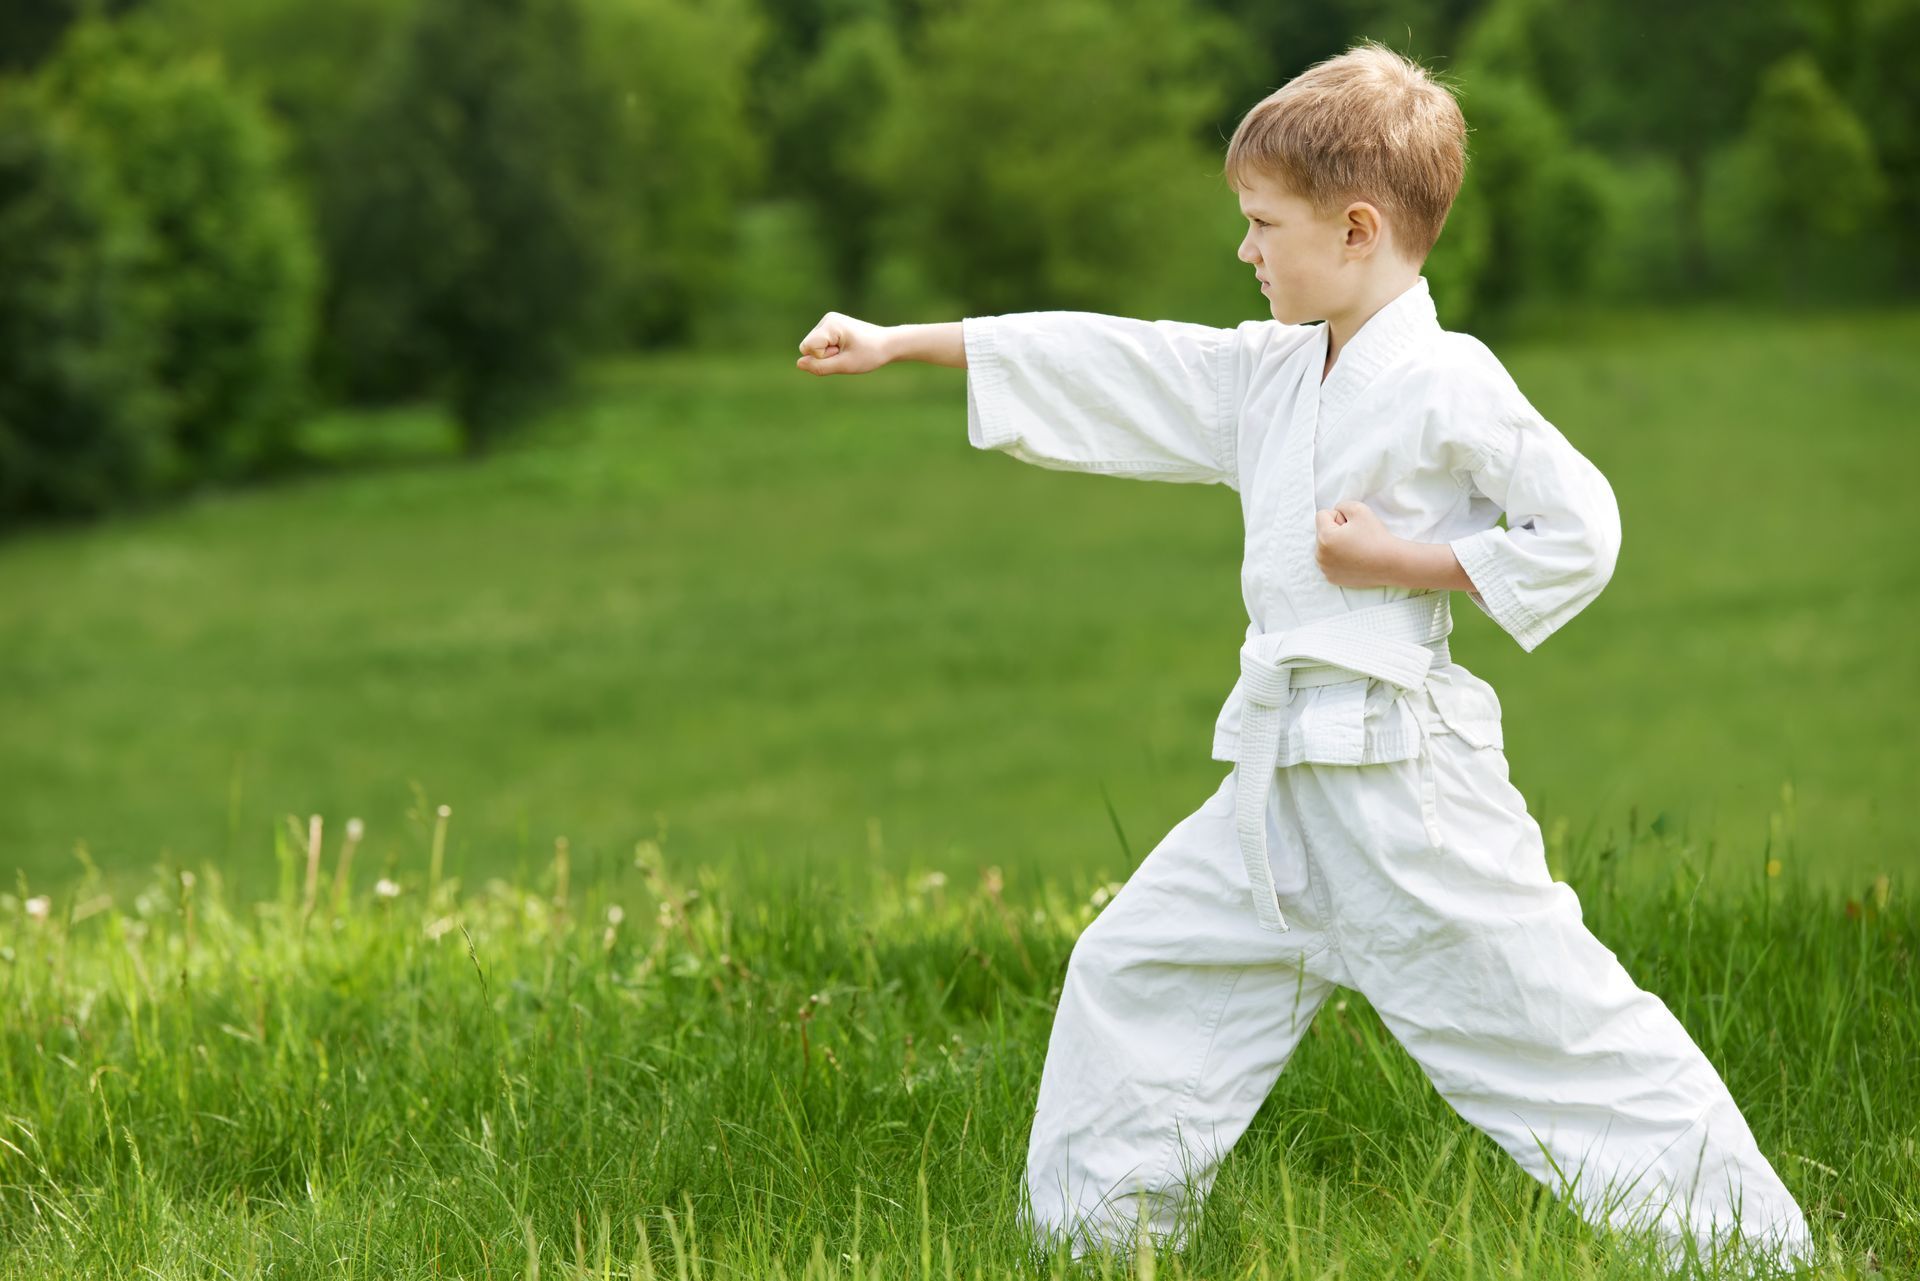 Enjoy an Action-Packed Summer with Martial Arts